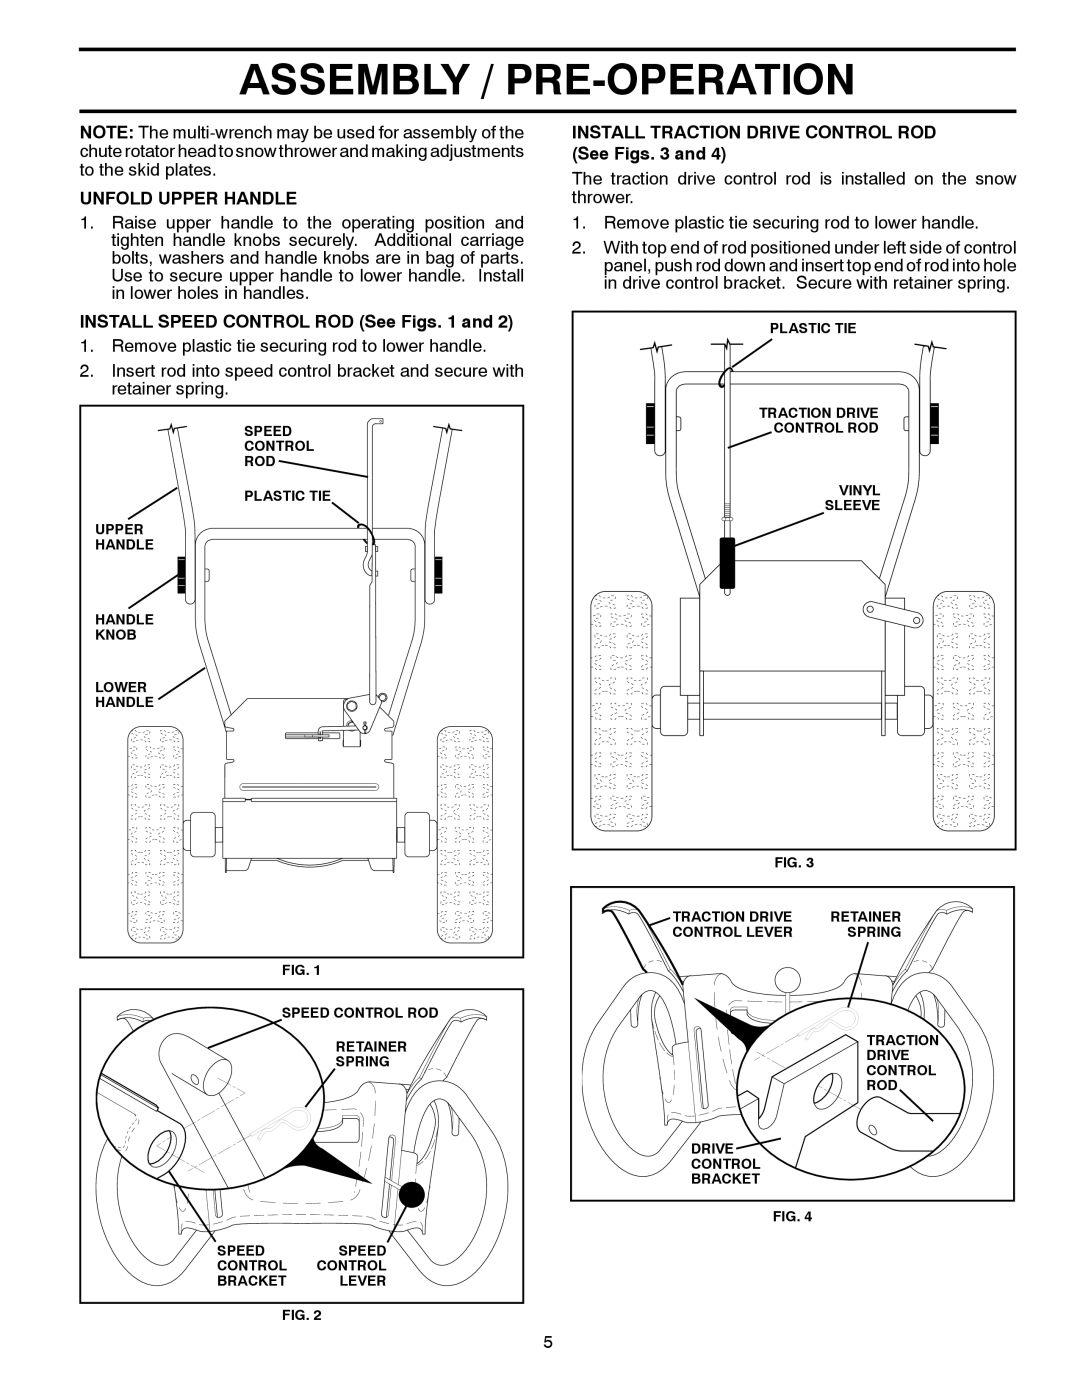 Poulan 96192002801 Assembly / Pre-Operation, Unfold Upper Handle, INSTALL SPEED CONTROL ROD See Figs. 1 and, Plastic Tie 